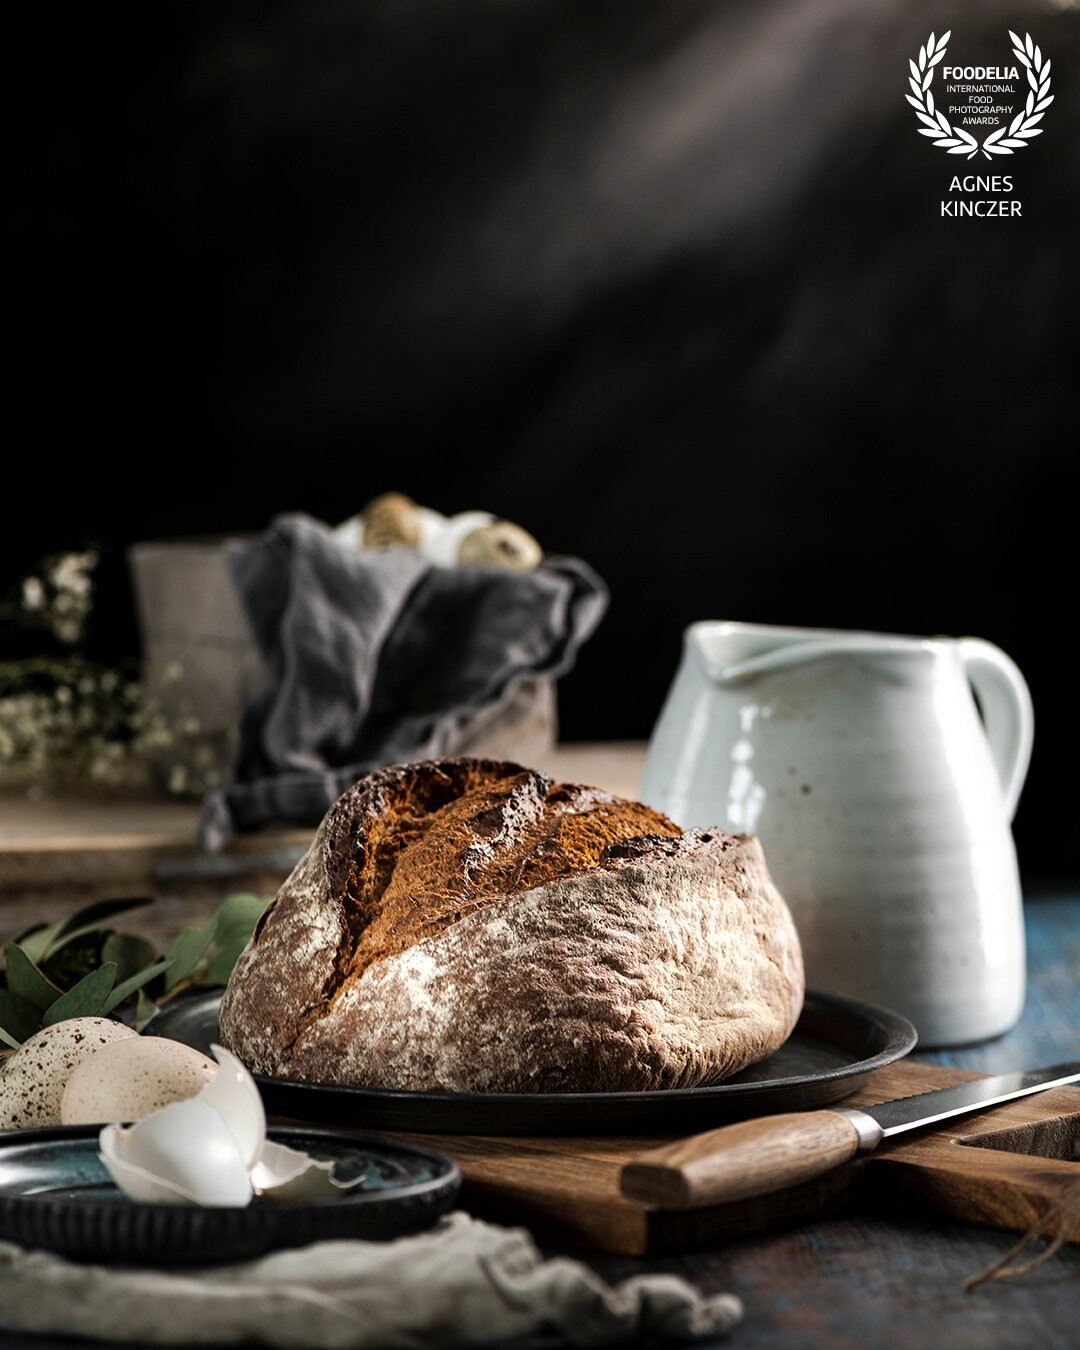 Playing with light to create a moody atmosphere around a loaf of bread, which is being prepared for the dinner table. The dark backround helps to highlight the main element.